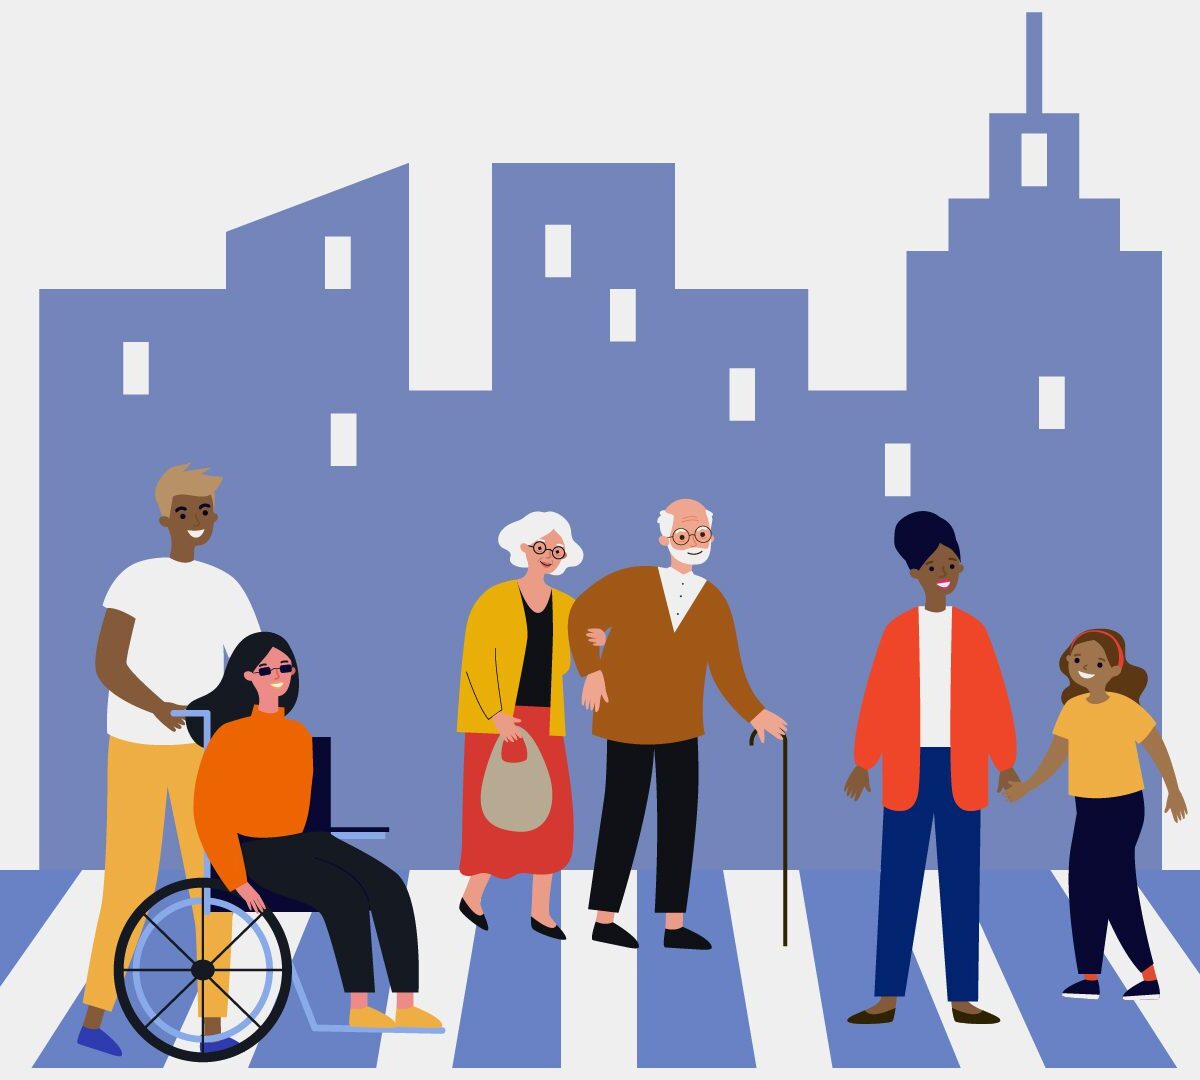 Caring for Family Caregivers invitation image: Diverse and differently abled neighbors of various age meet on a crosswalk in a boldly colored city setting.